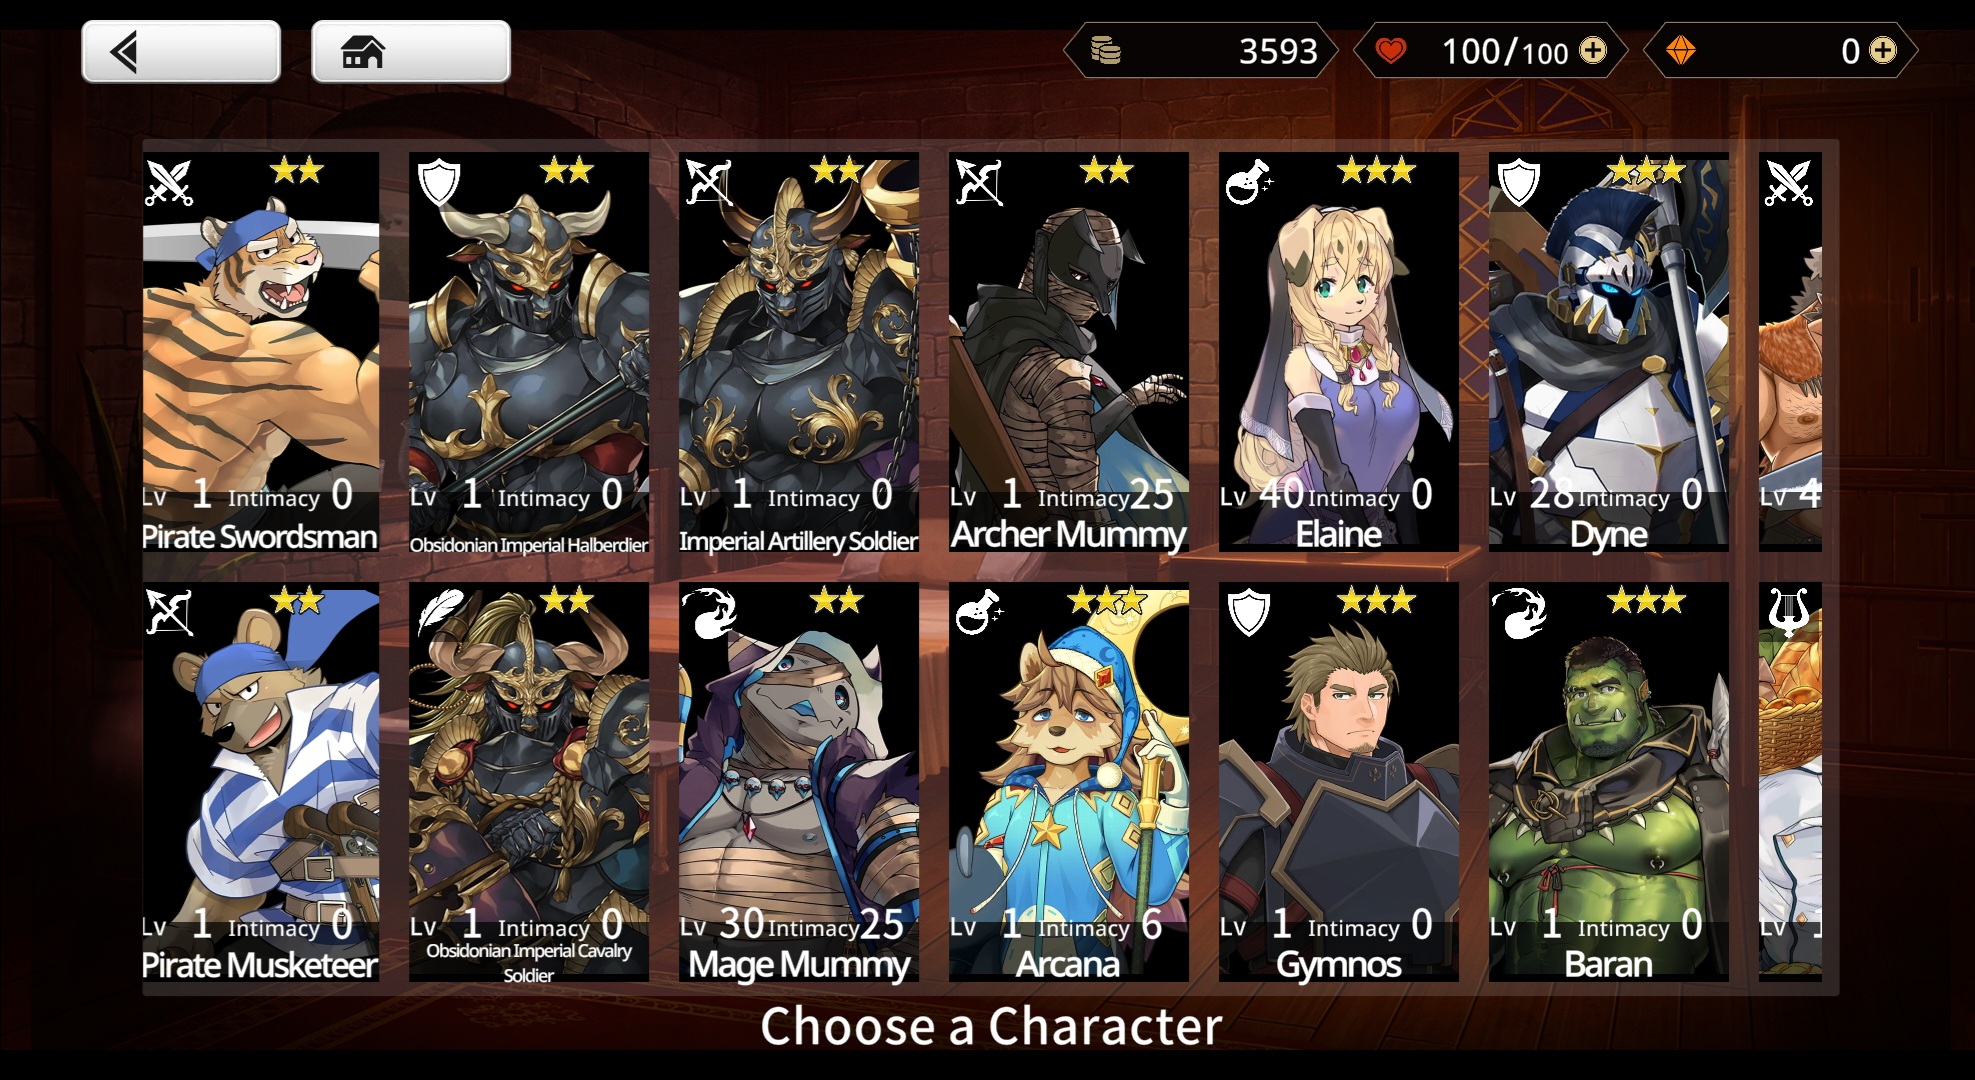 Simply select a character you like and..